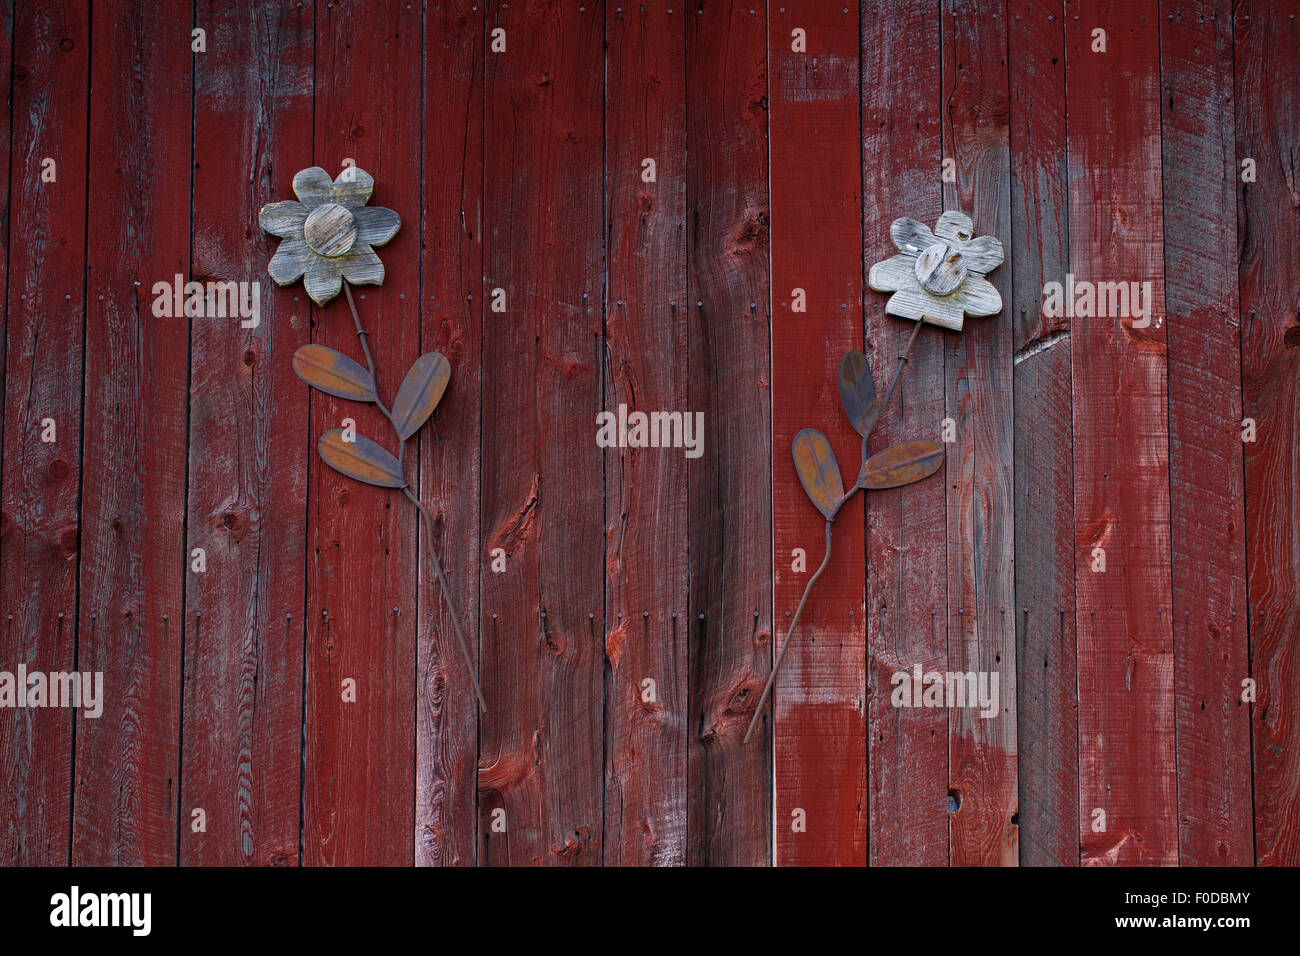 Decorative flowers on red barn door, St. Paul d'Abbotsford, Eastern Townships, Quebec, Canada Stock Photo